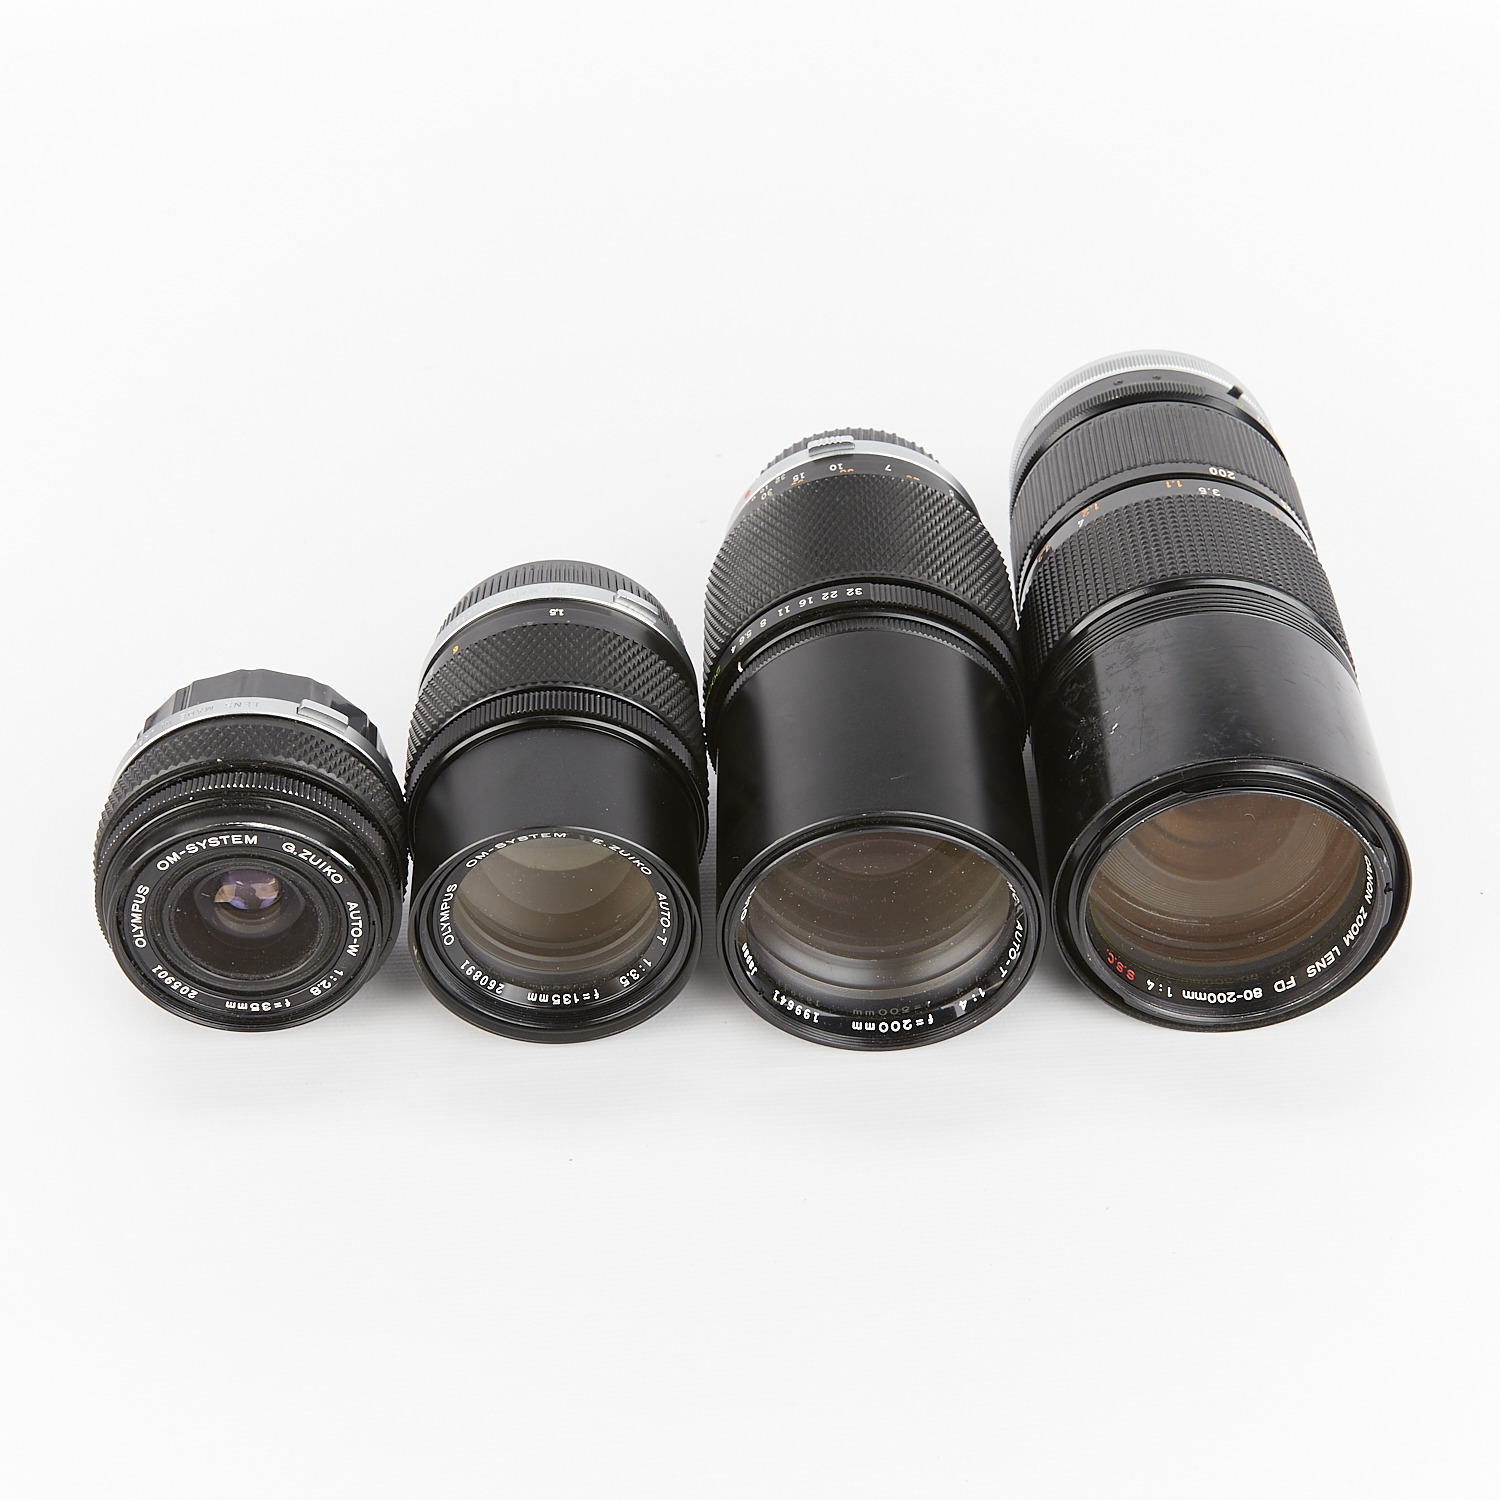 Group of 7 Olympus Cameras & Lenses - Image 6 of 8